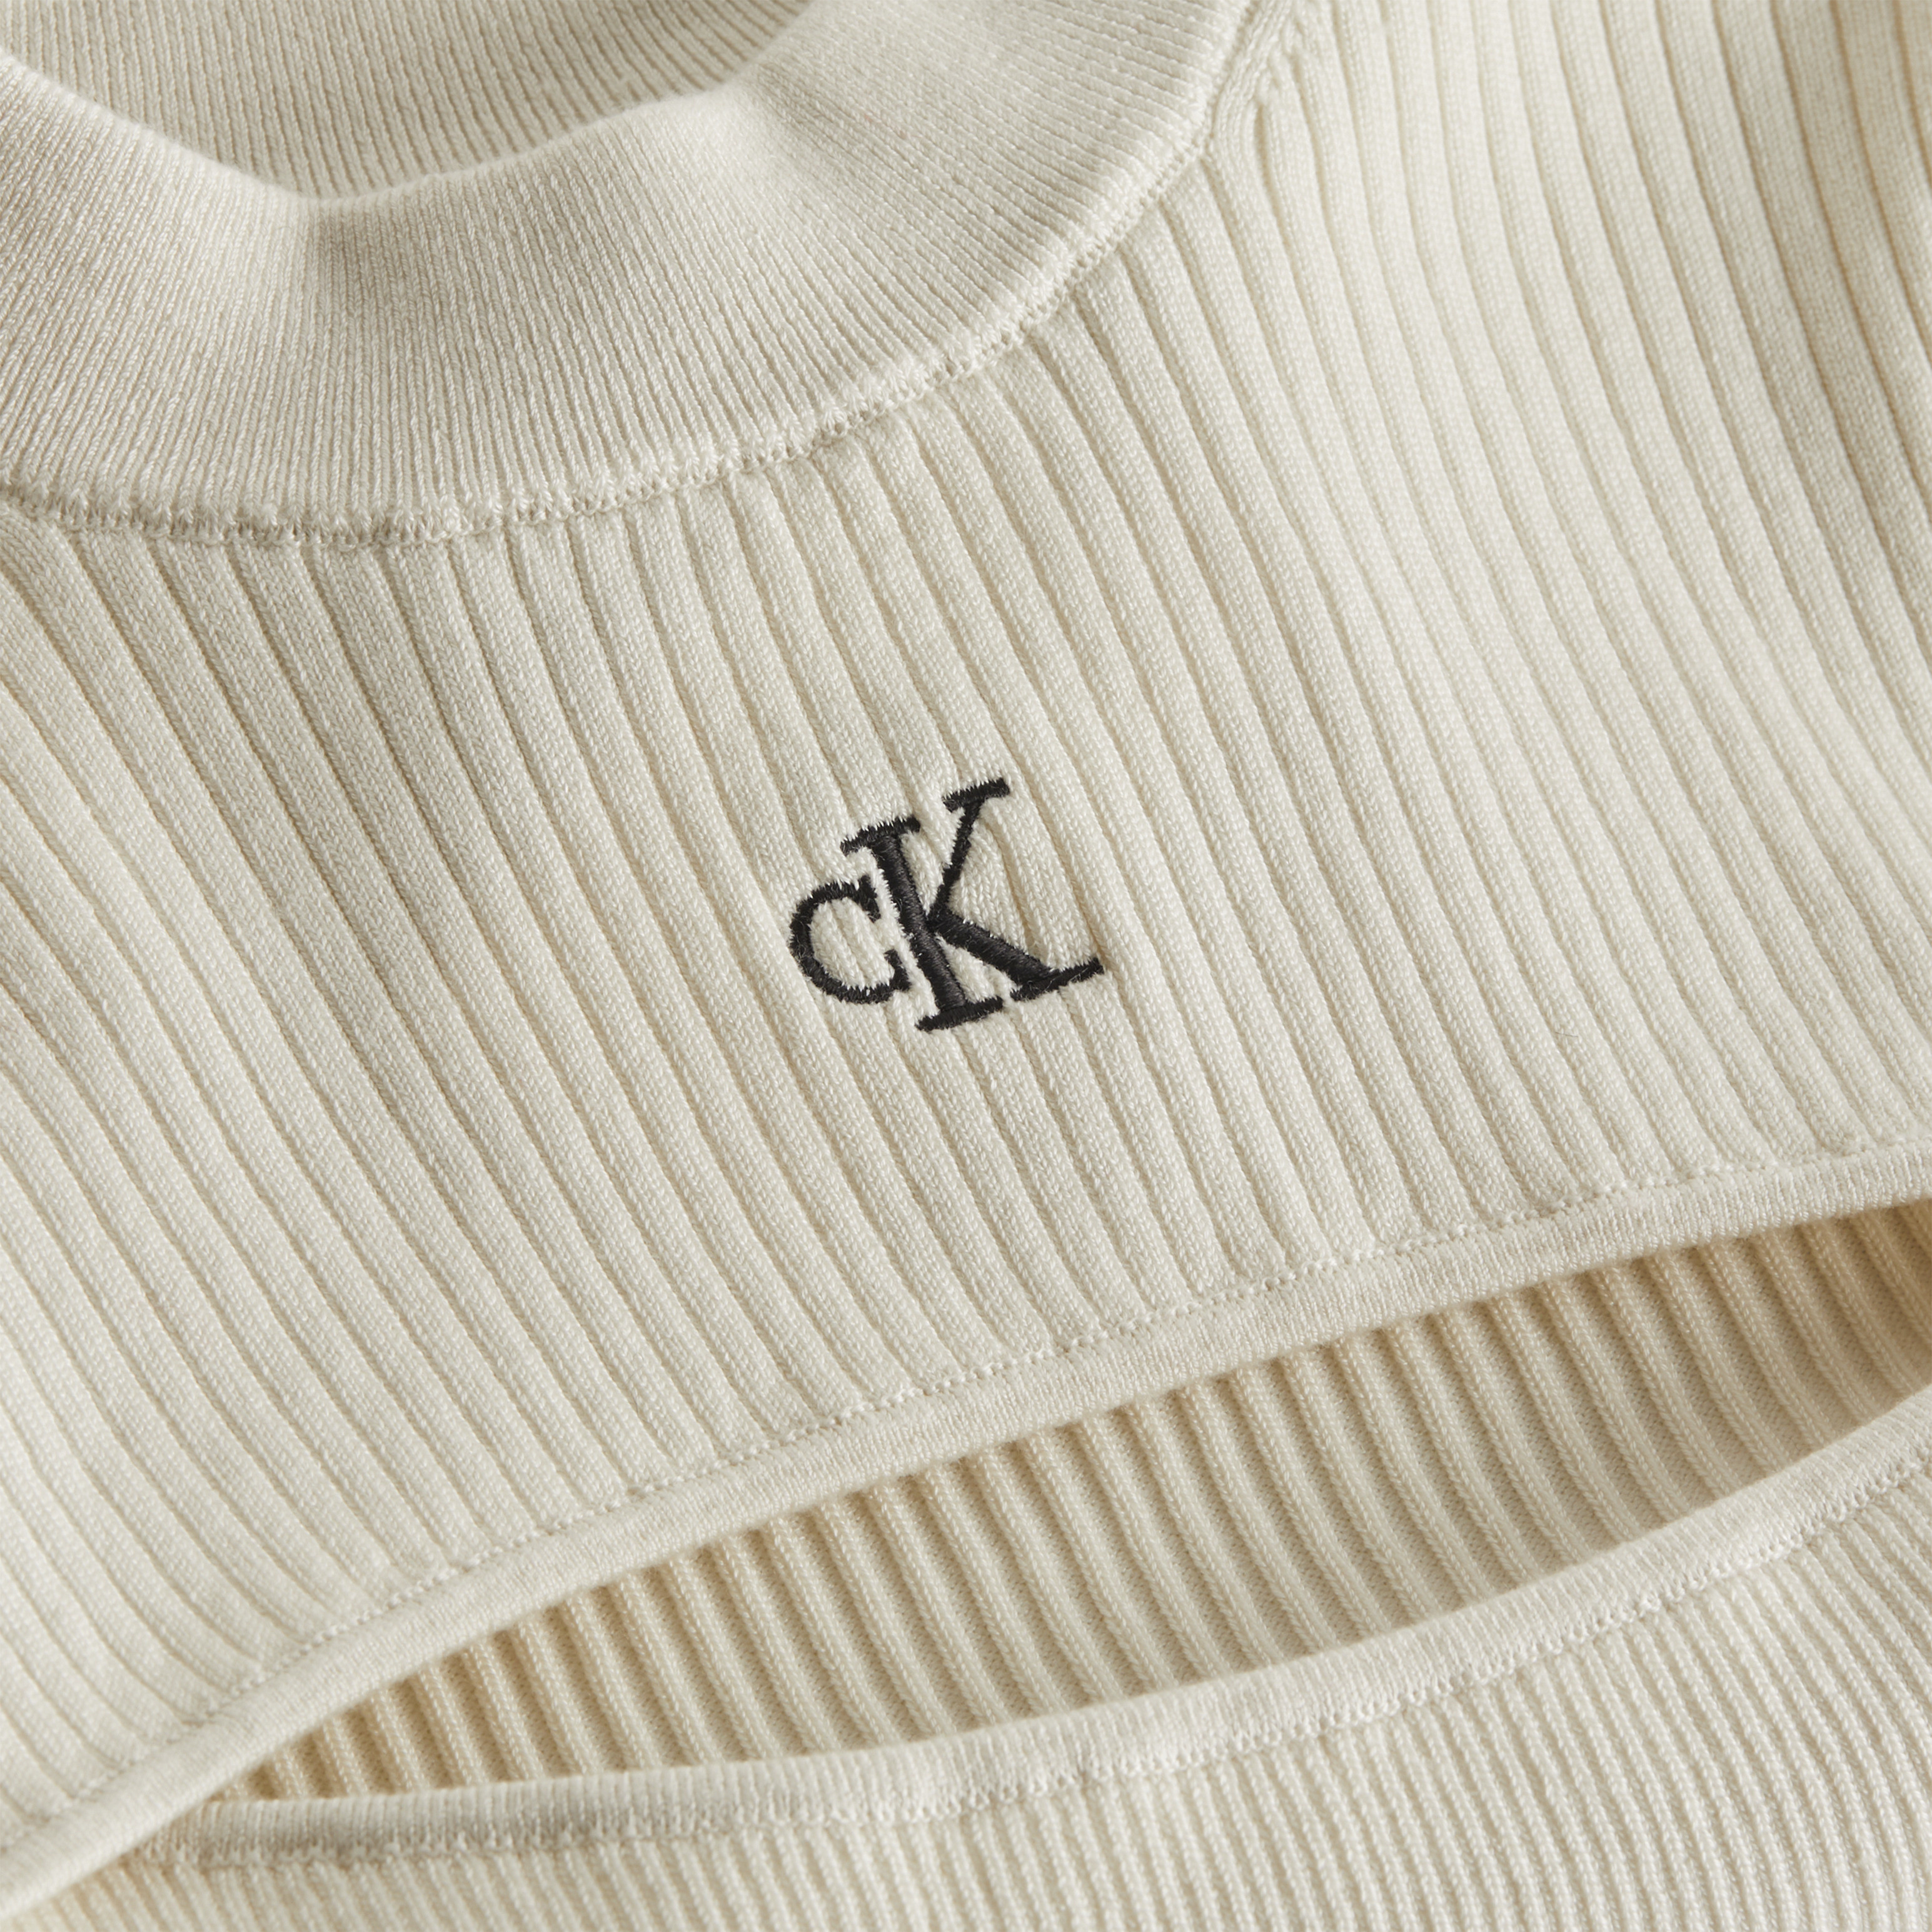 Calvin Klein Jeans - Maglia crop con effetto cut out, Bianco avorio, large image number 2